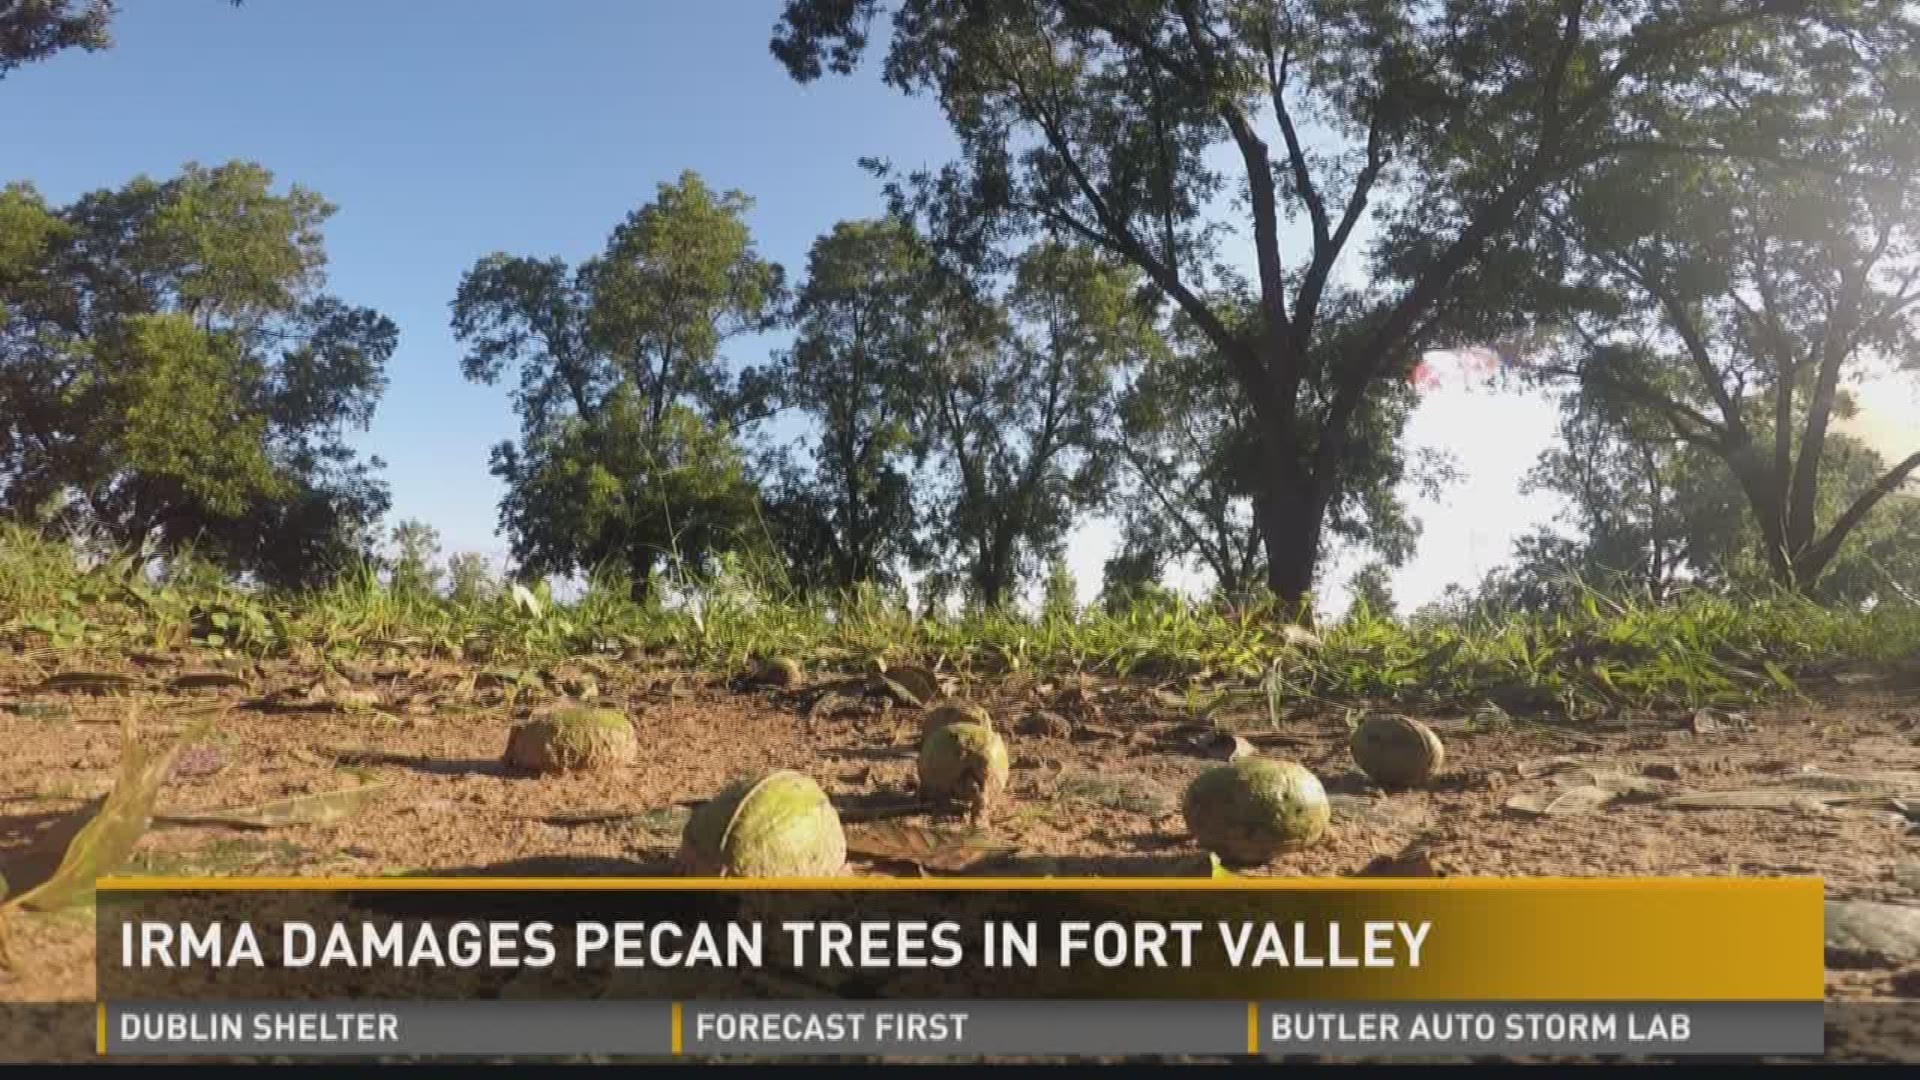 Irma damages pecan trees in Fort Valley